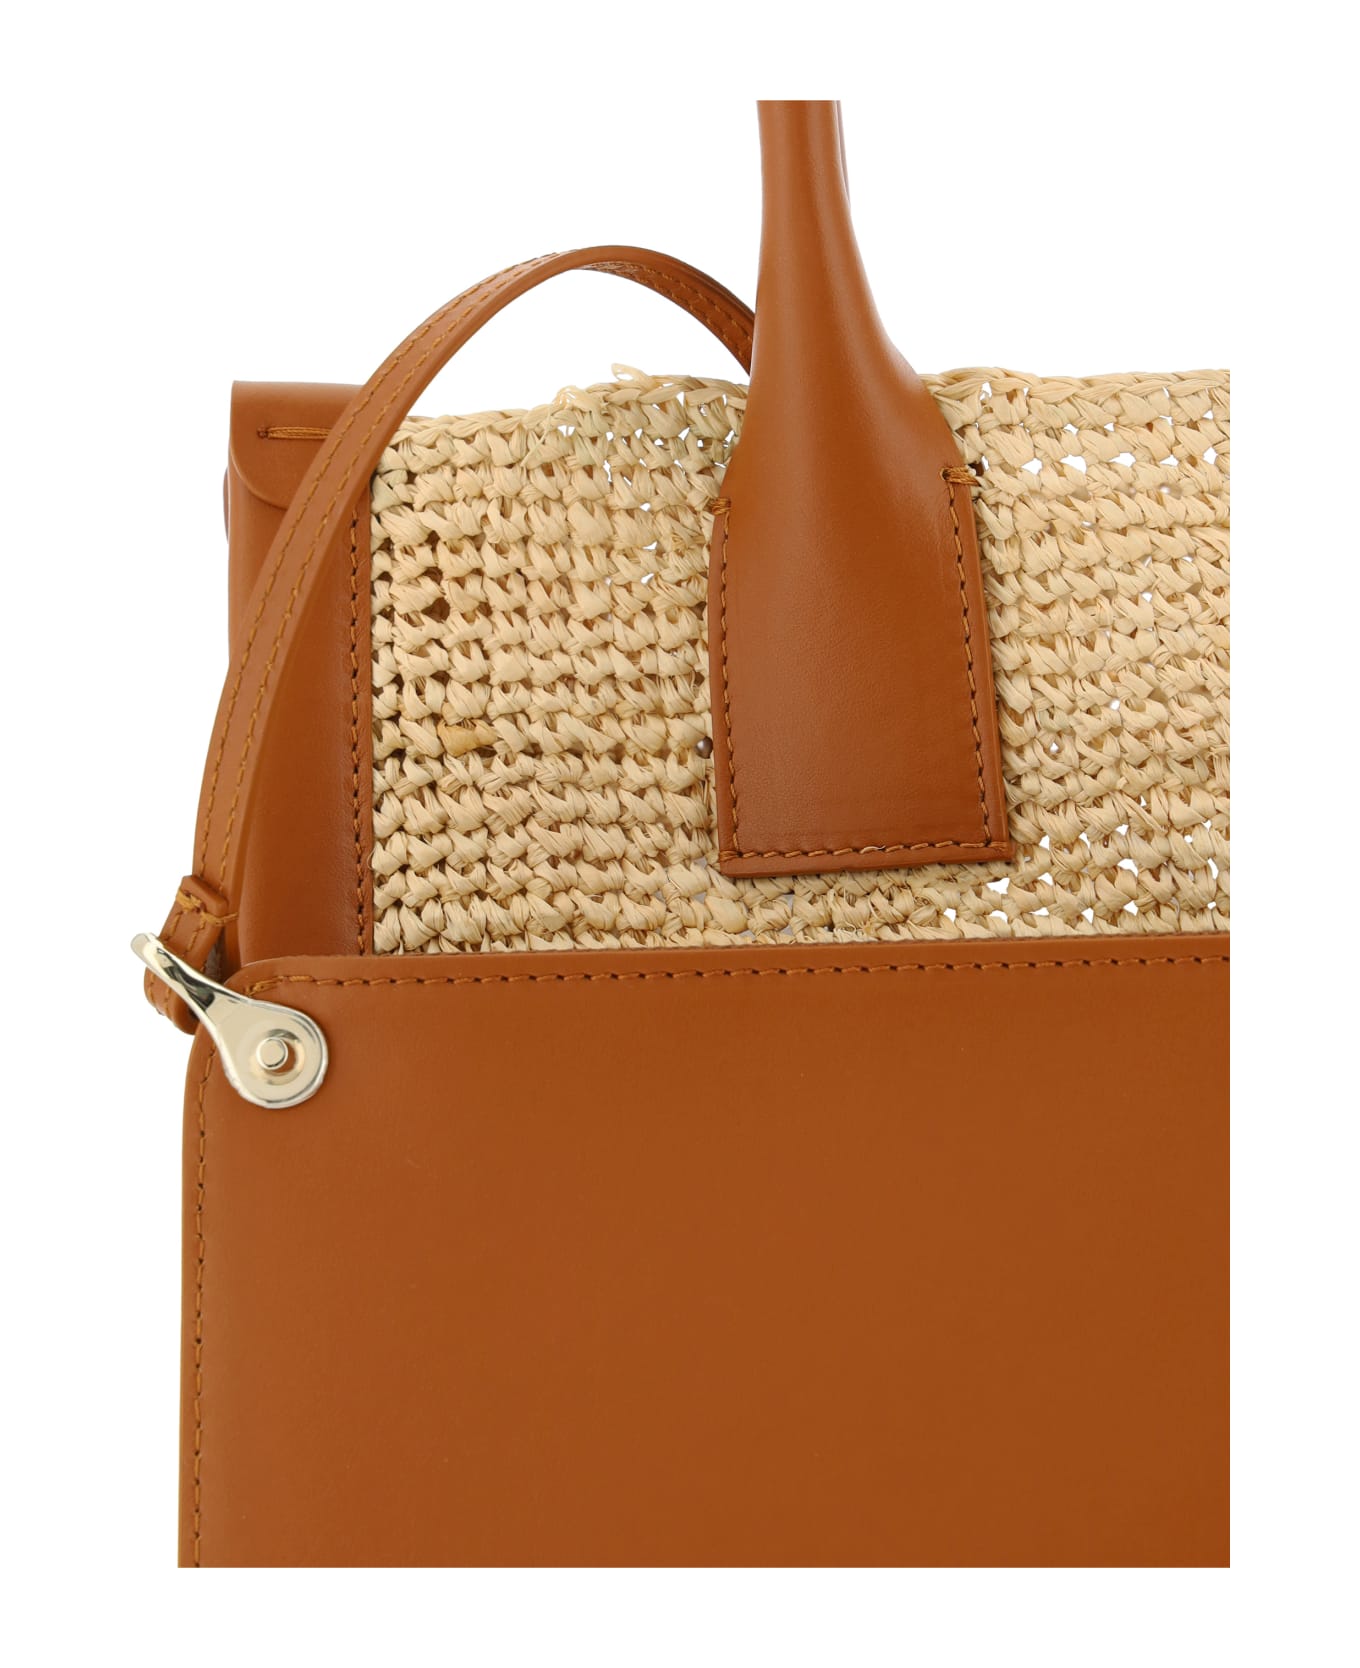 Christian Louboutin By My Side Small Handbag - Natural/cuoio トートバッグ